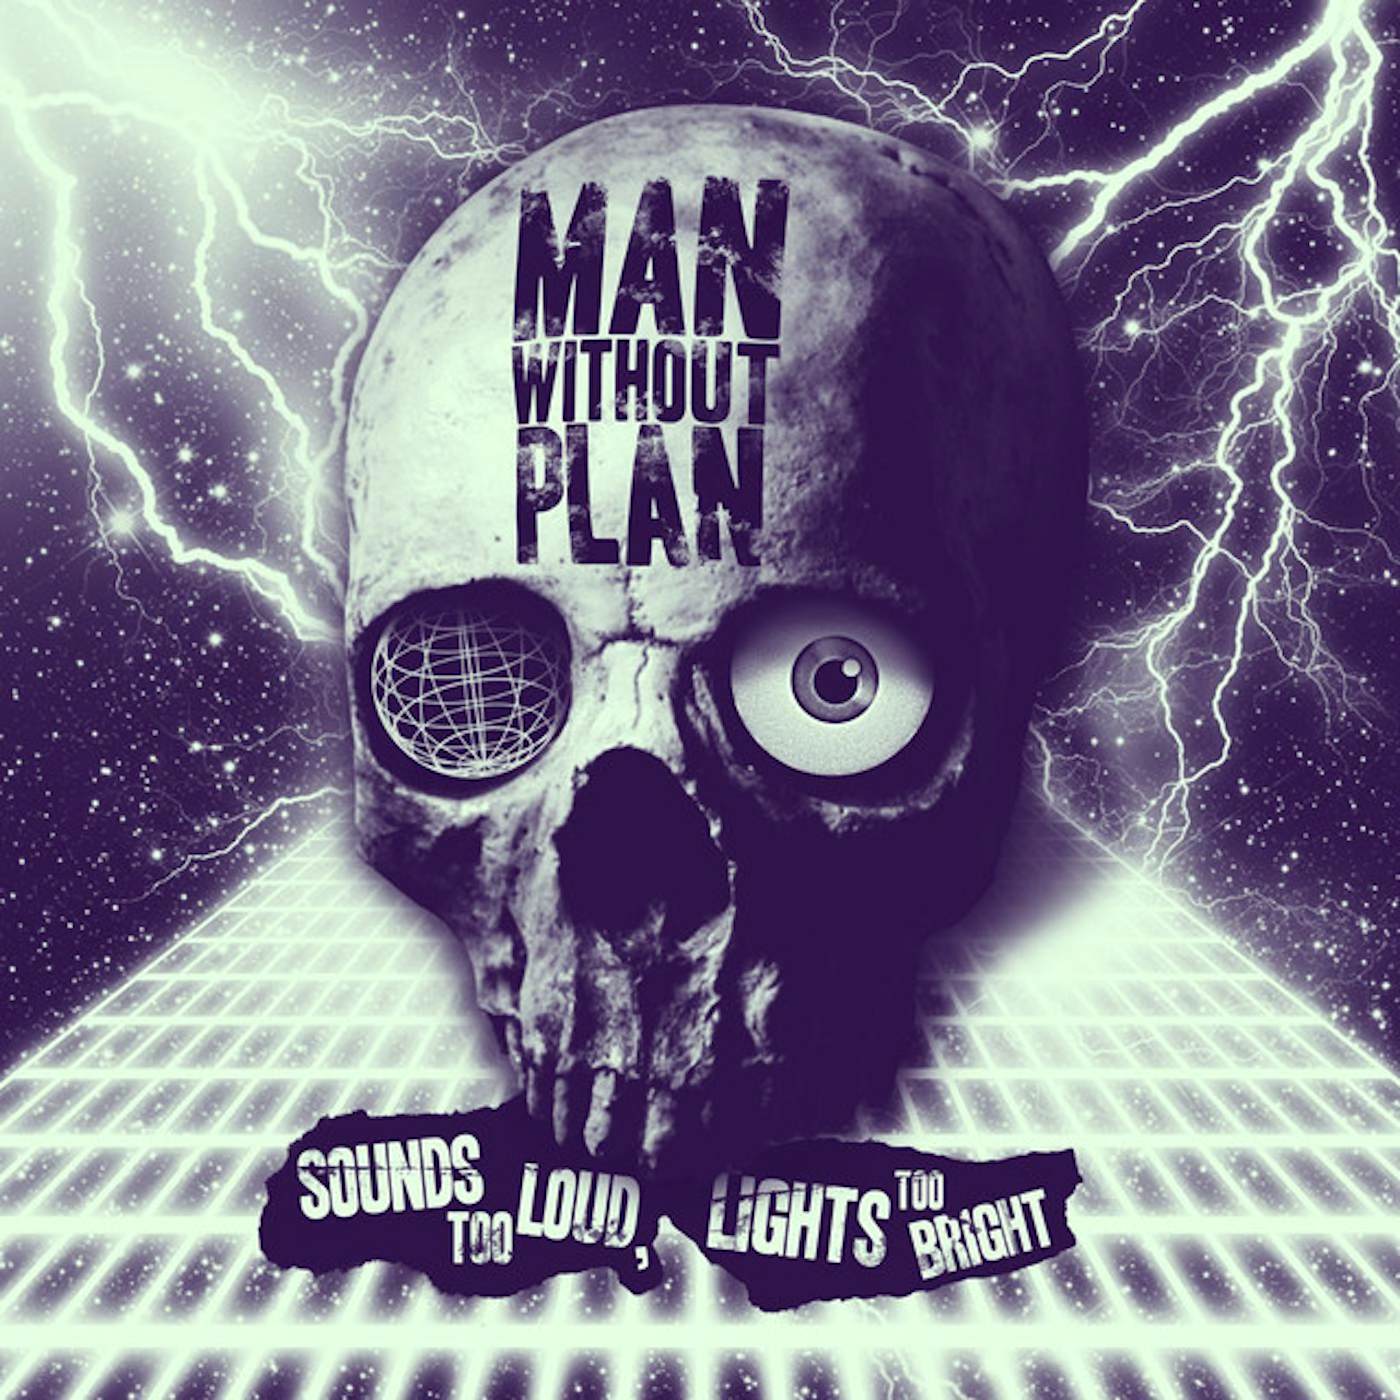 Man Without Plan SOUNDS TOO LOUD LIGHTS TOO BRIGHT Vinyl Record